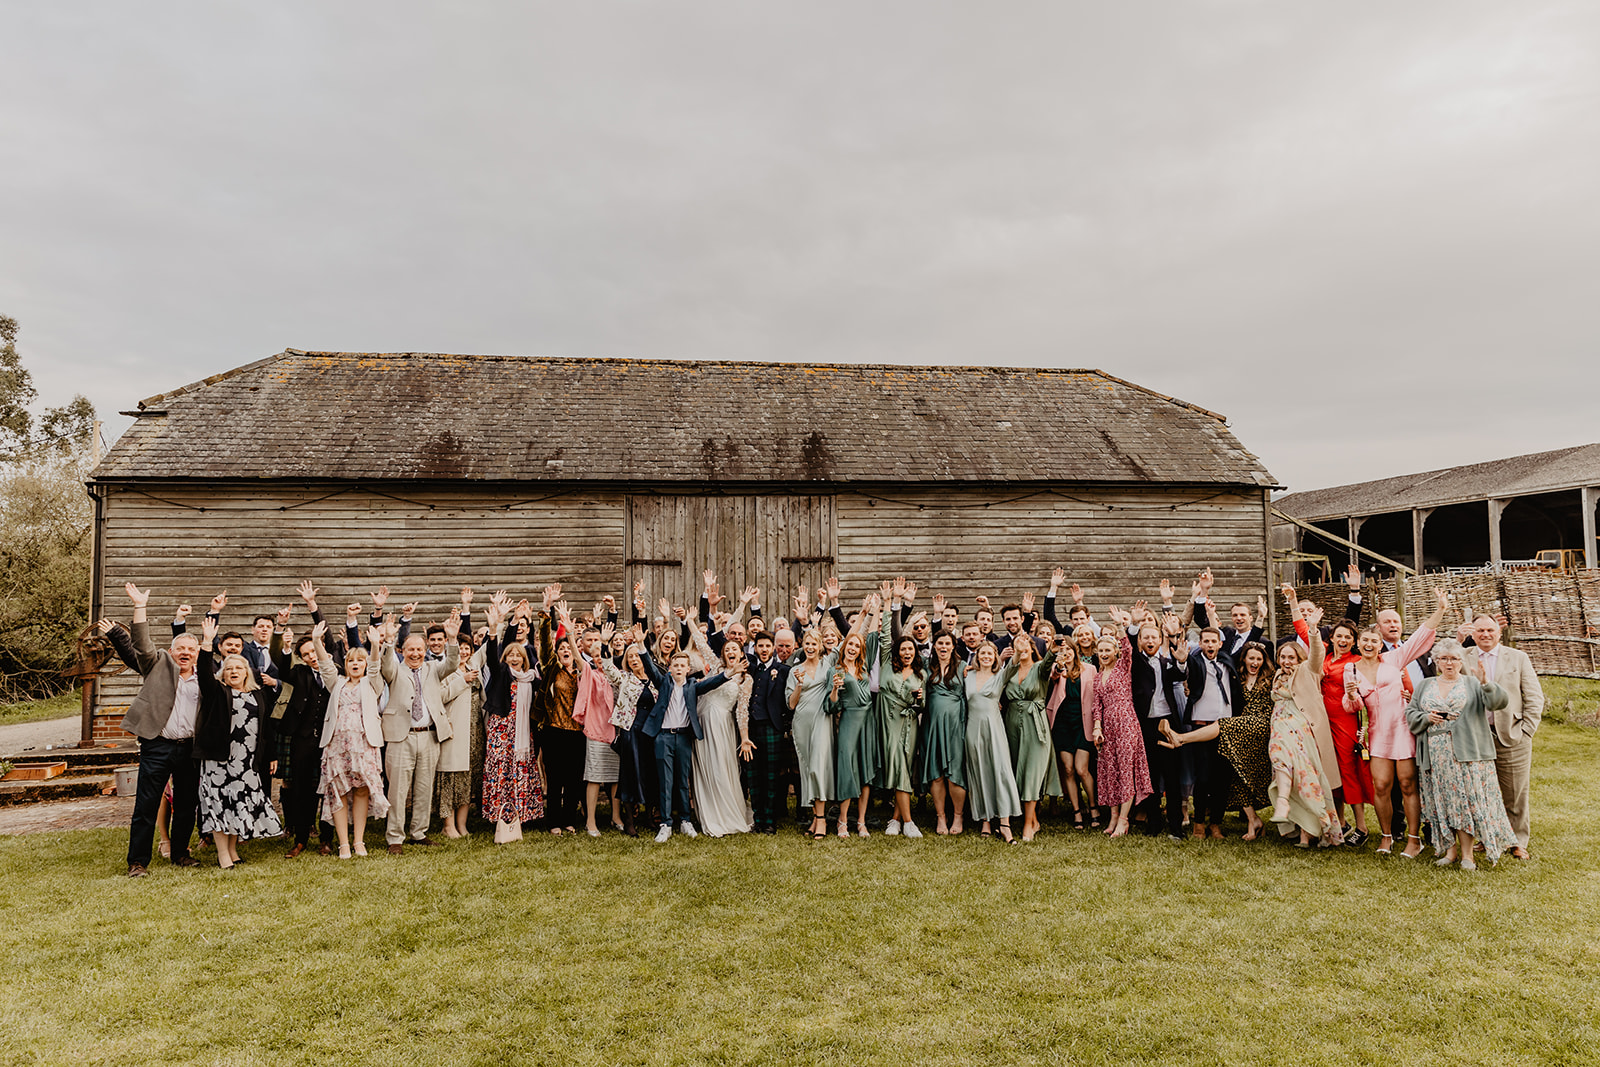 Wedding guests group photo at a Secret Barn Wedding, West Sussex. By Olive Joy Photography